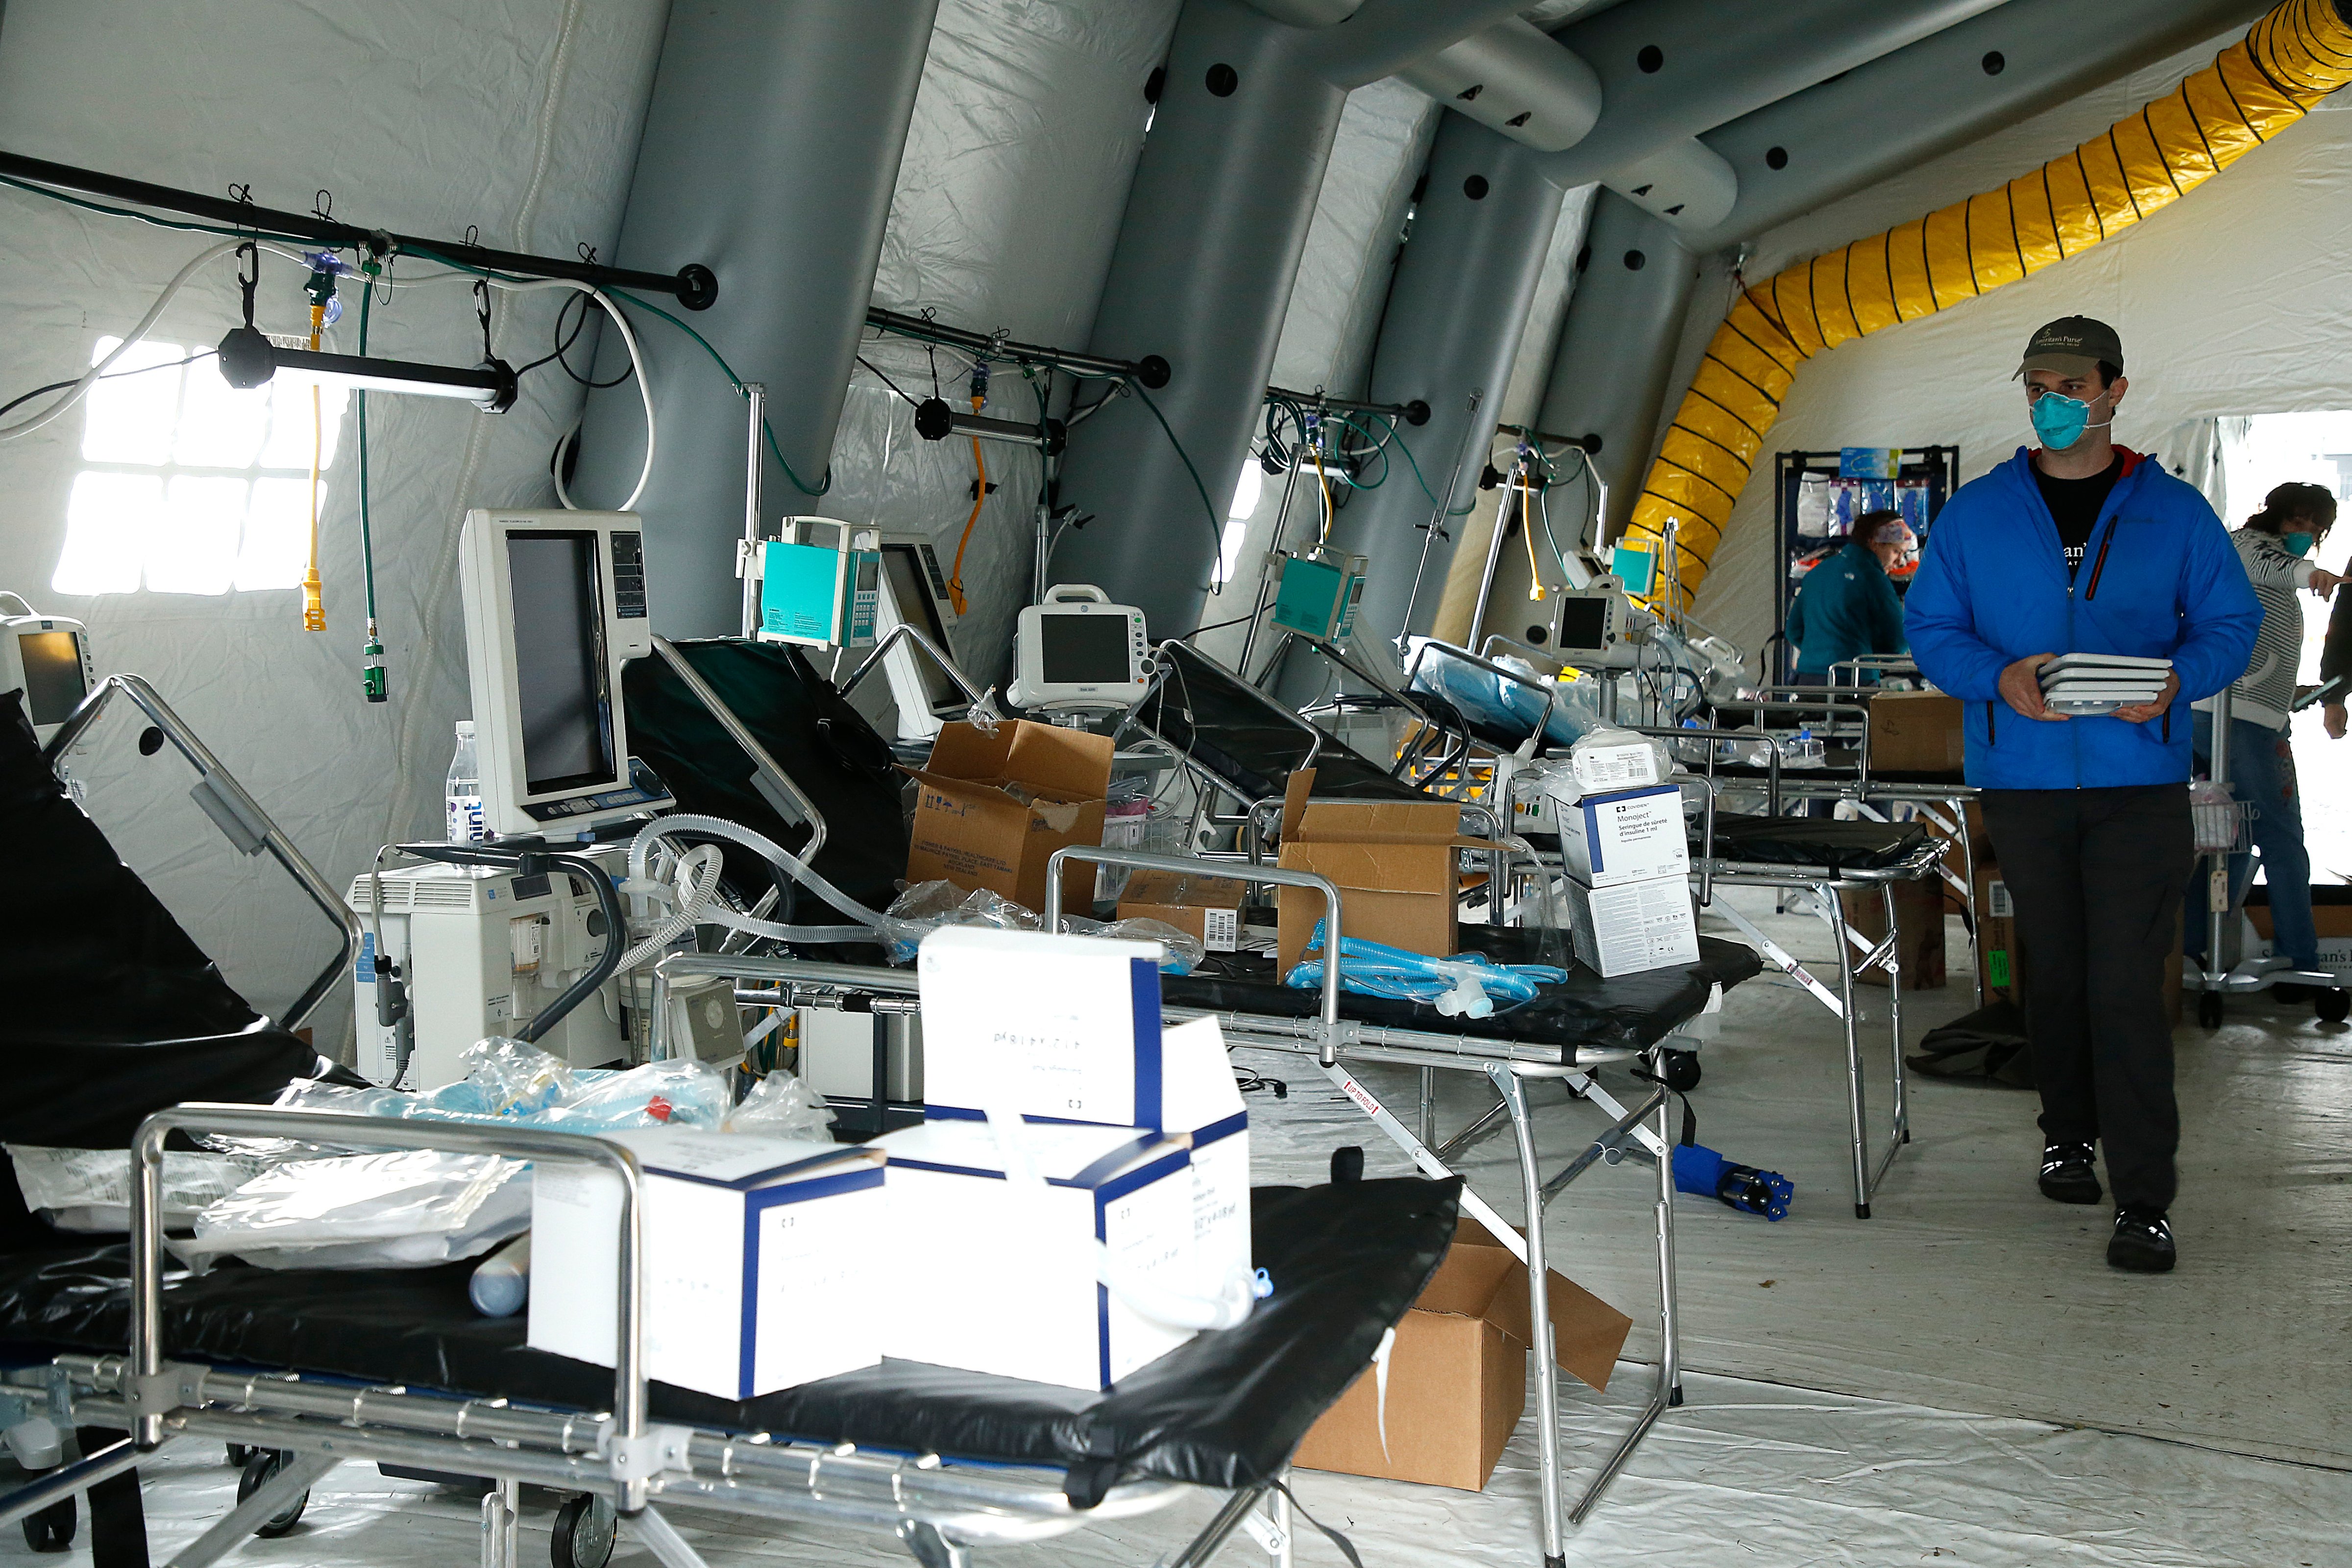 A hospital room is prepared at a temporary hospital in Central Park on March 30, 2020 in New York City. The facility is a partnership between Mt. Sinai Hospital and Christian humanitarian aid organization Samaritan's Purse, equipped with 68 beds to treat COVID-19 patients. (John Lamparski—Getty Images)